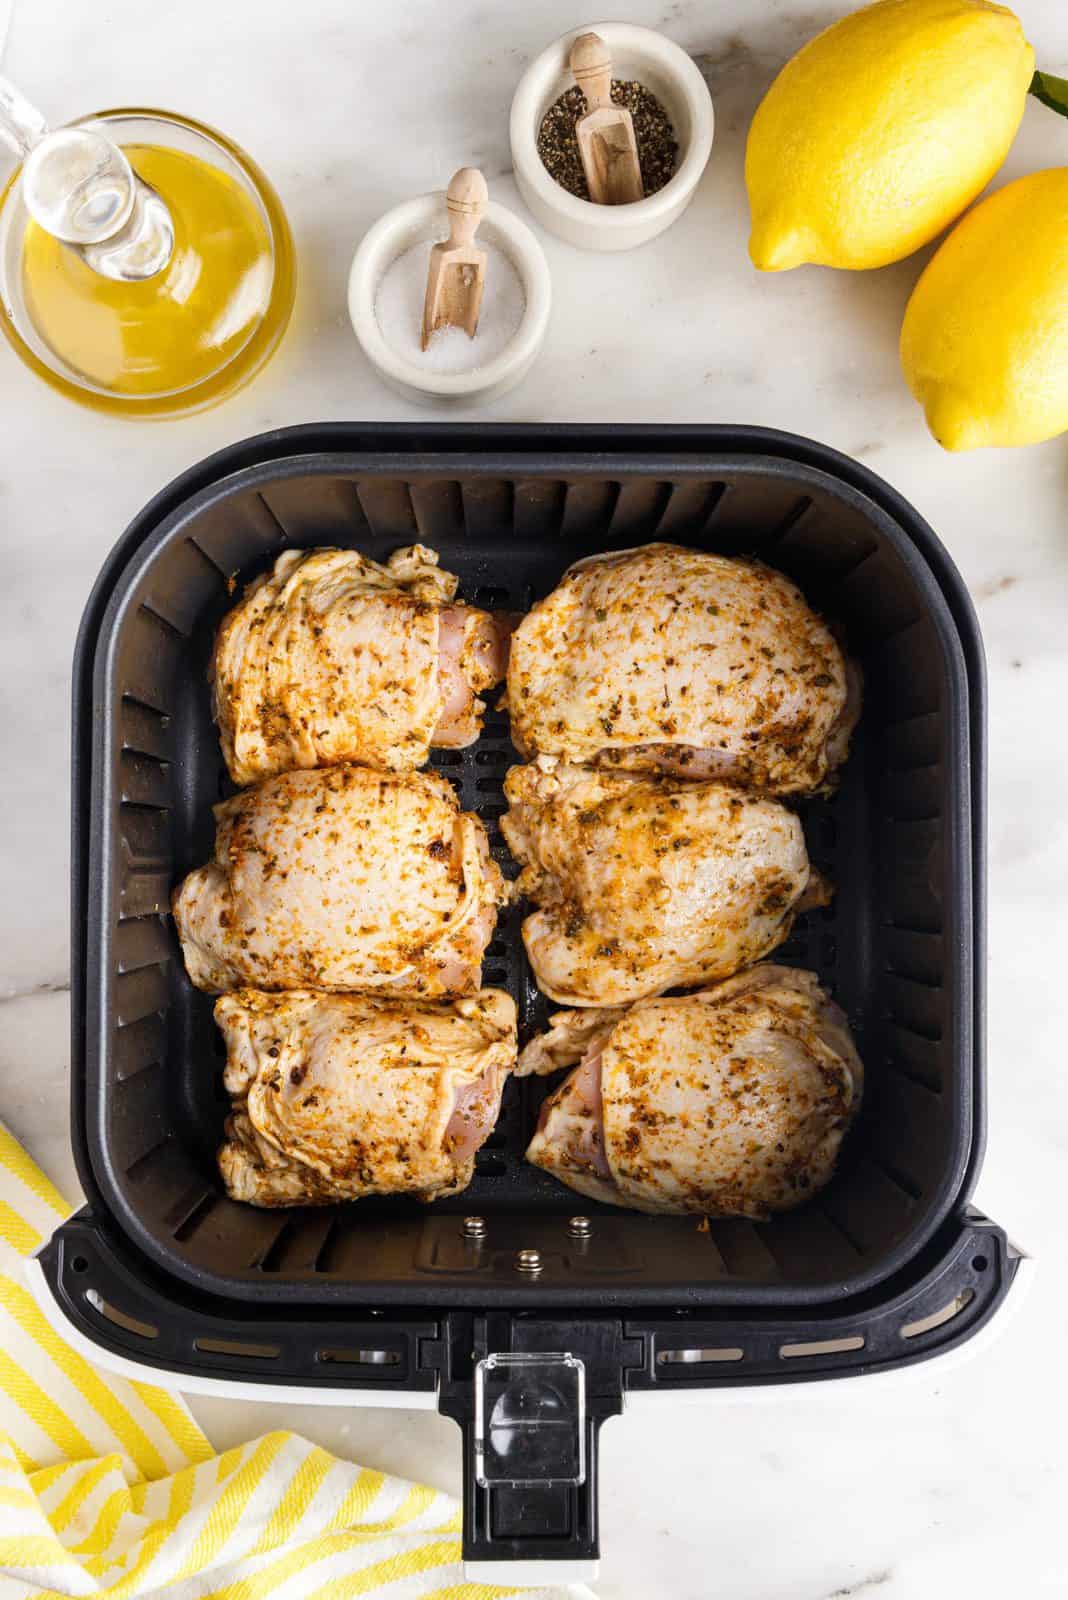 Chicken thighs placed into air fryer basket.